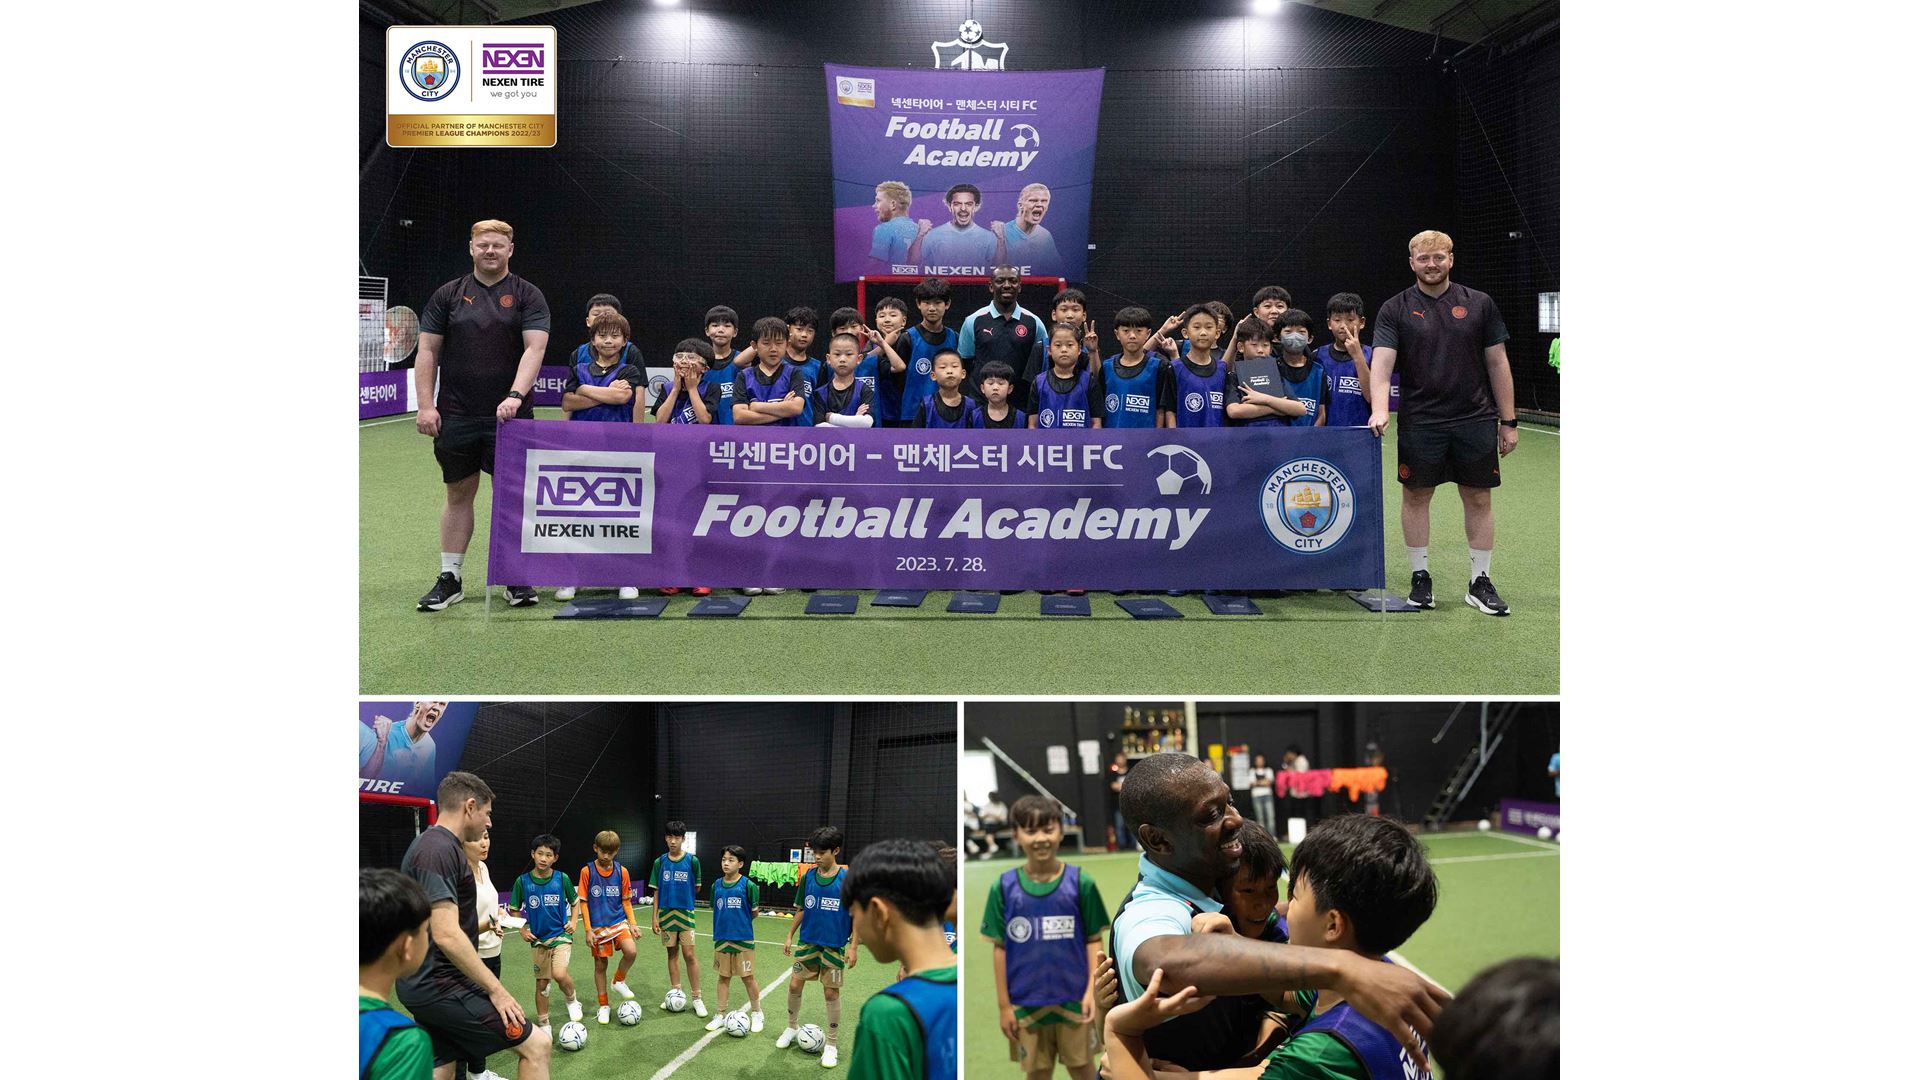 Nexen Tire successfully carries out Youth Football Academy with partner Man City in Korea